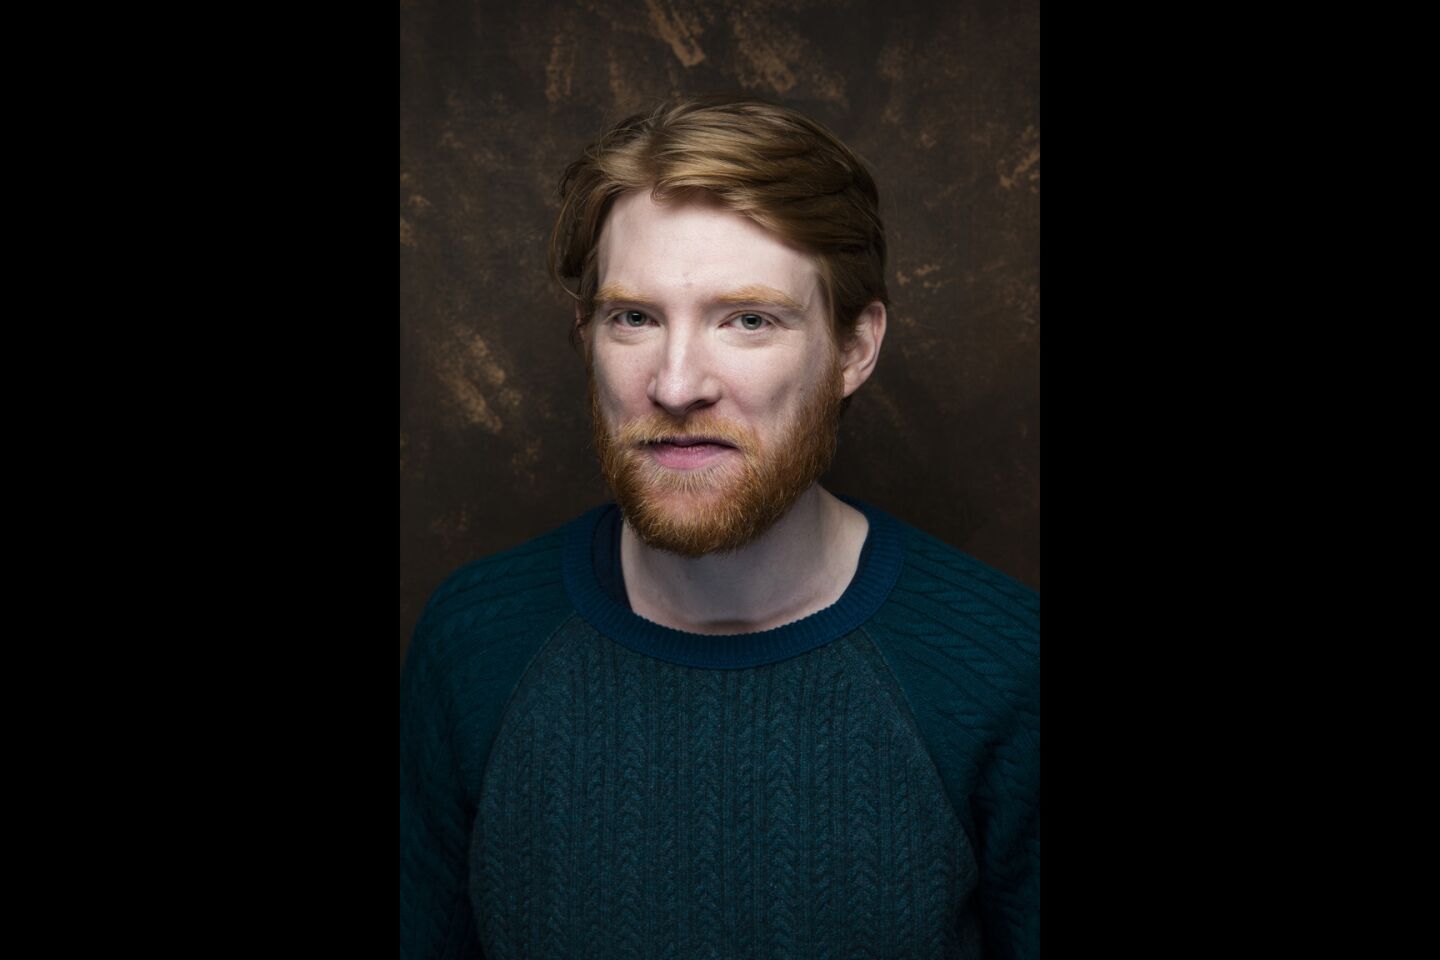 Actor Domhnall Gleeson from the film "A Futile and Stupid Gesture."